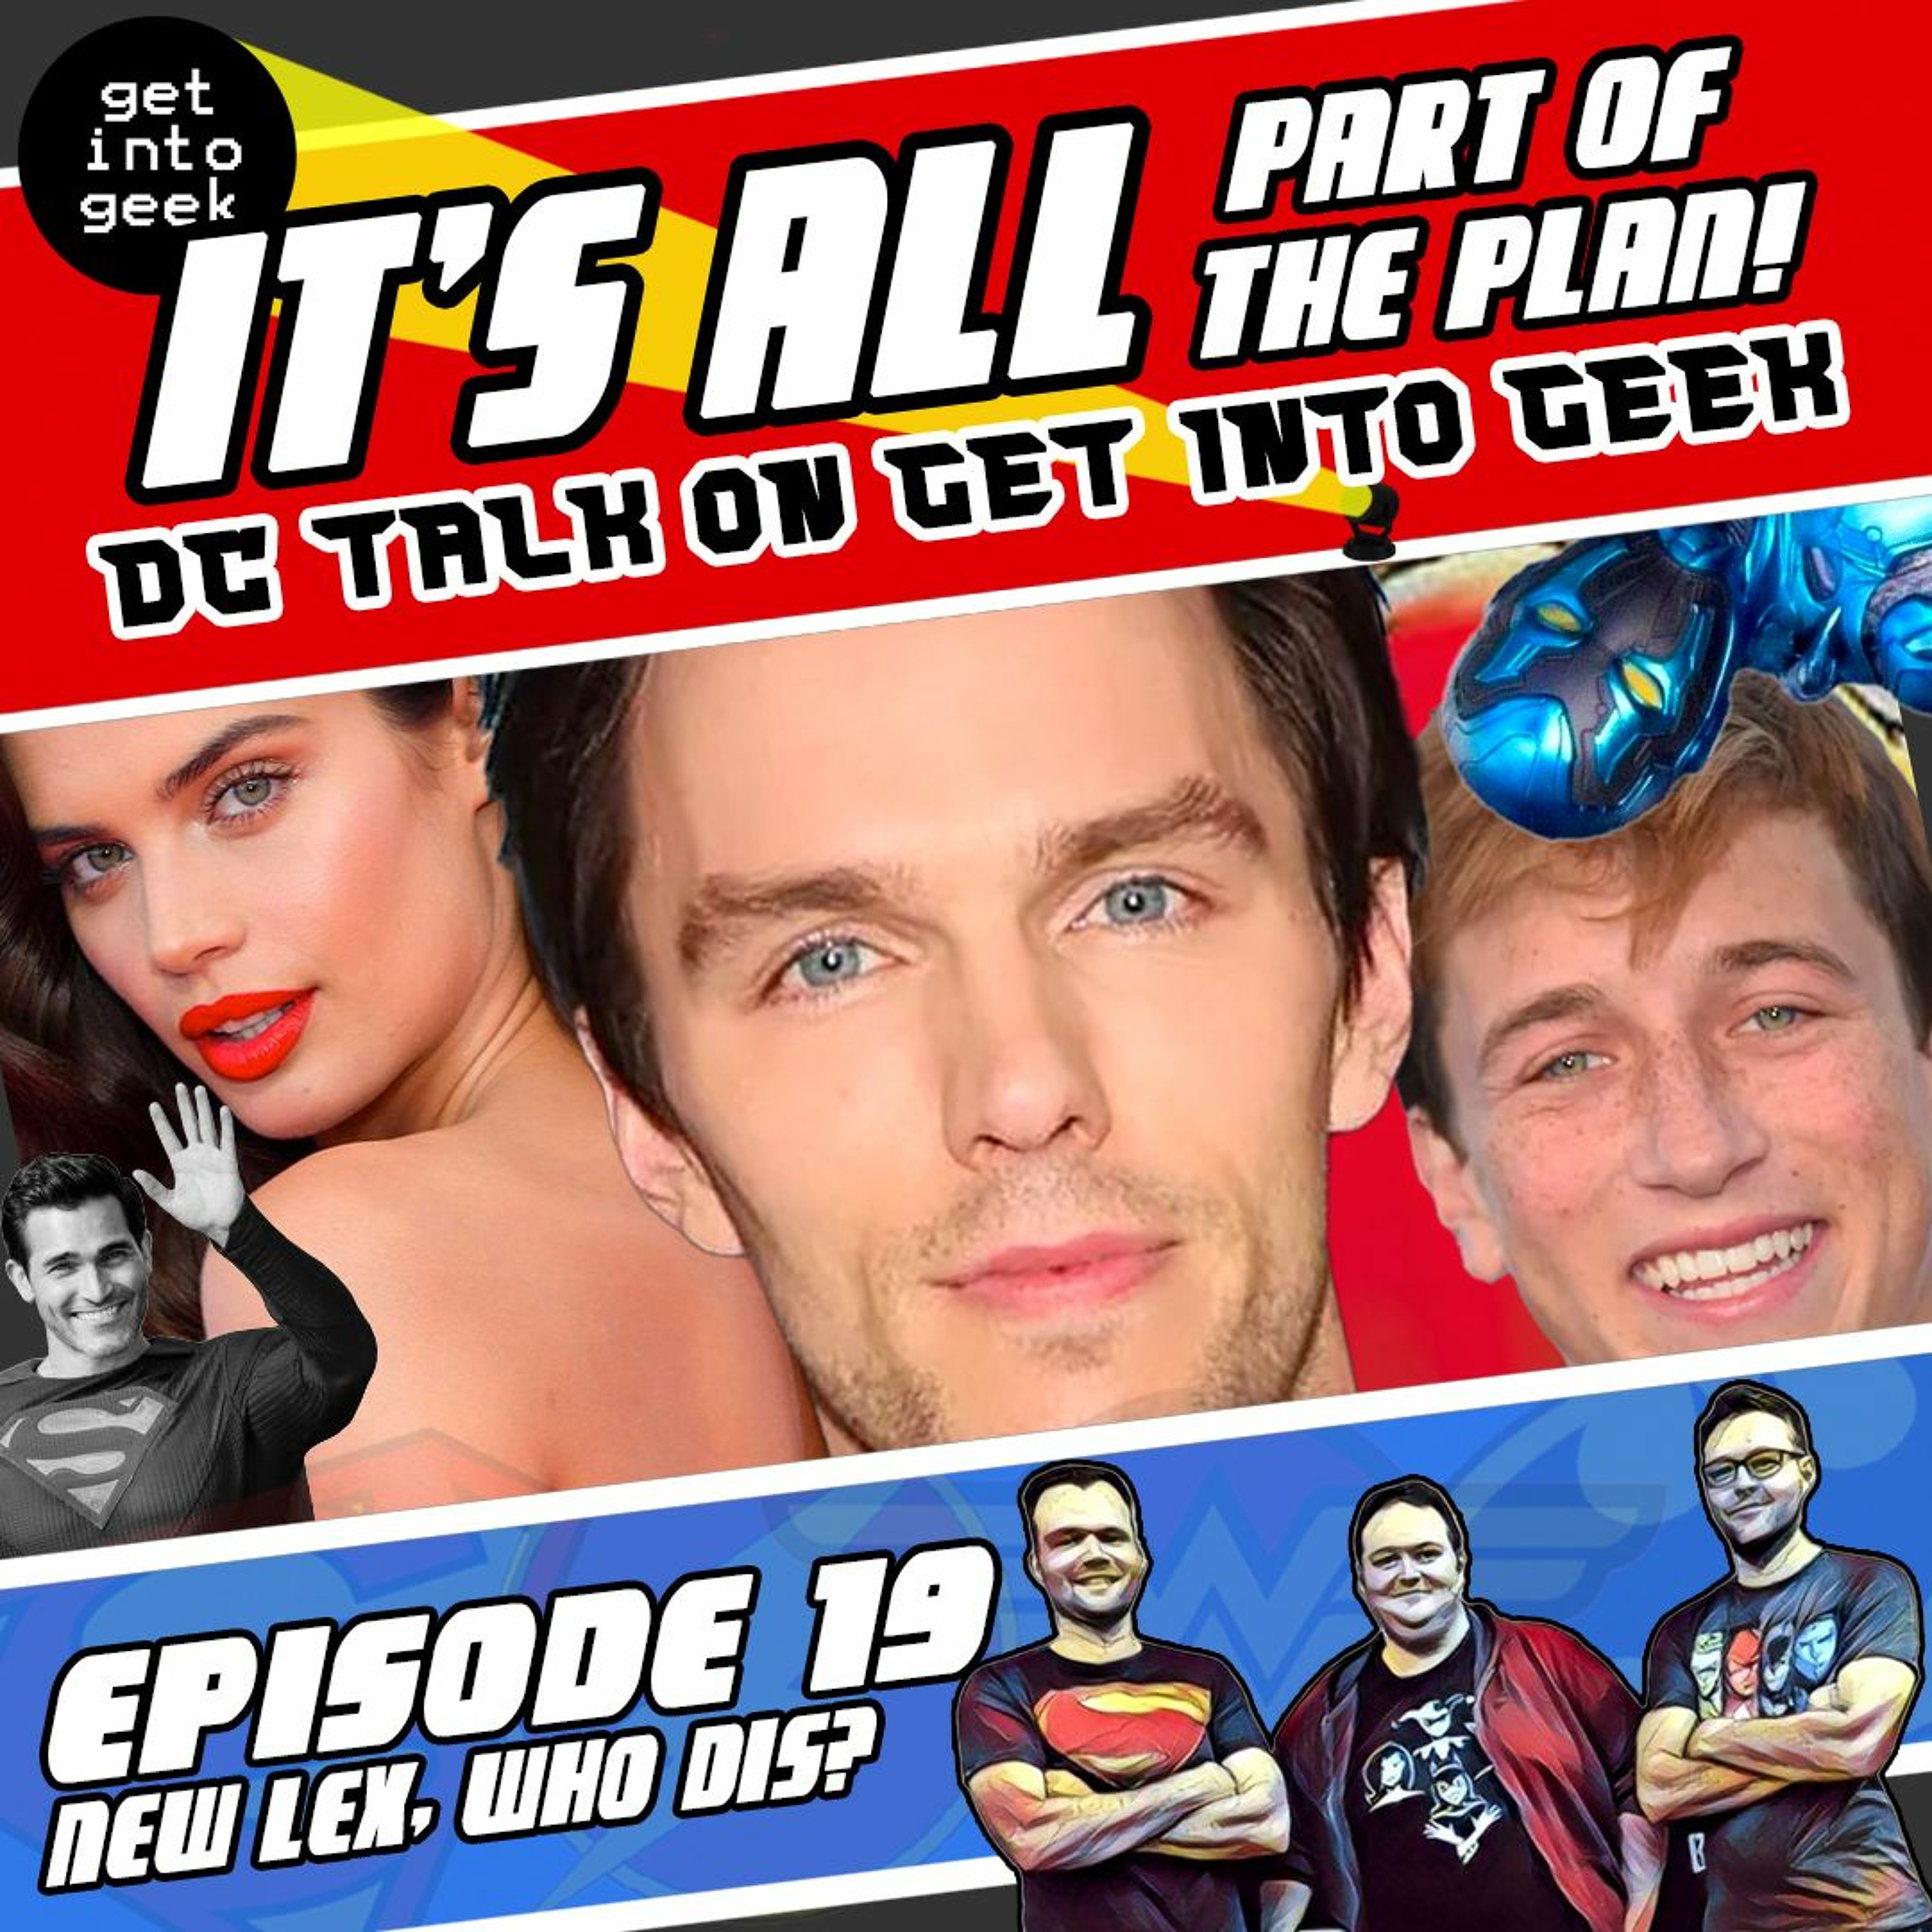 New Lex, Who Dis? (It’s All Part Of The Plan - DC Talk Episode 1.19)